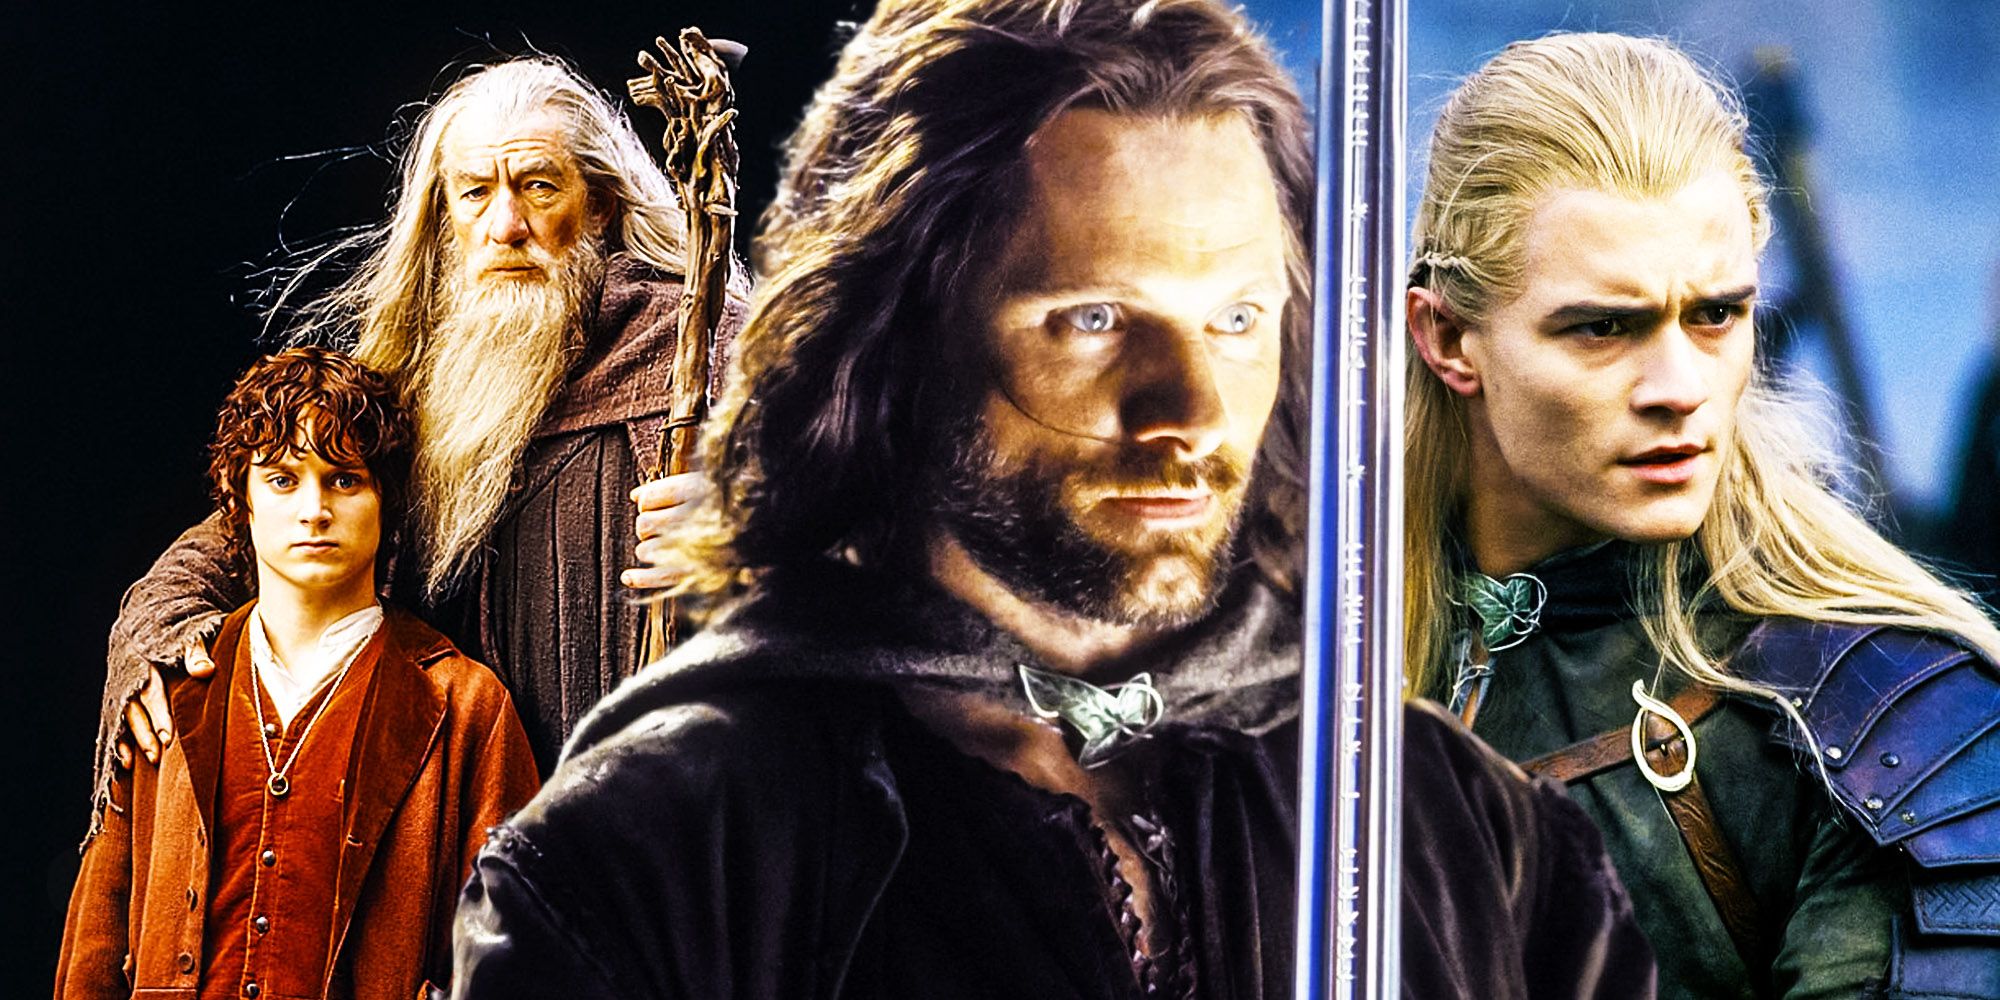 Lord of The Rings: Fellowship of The Ring Movie Review for Parents